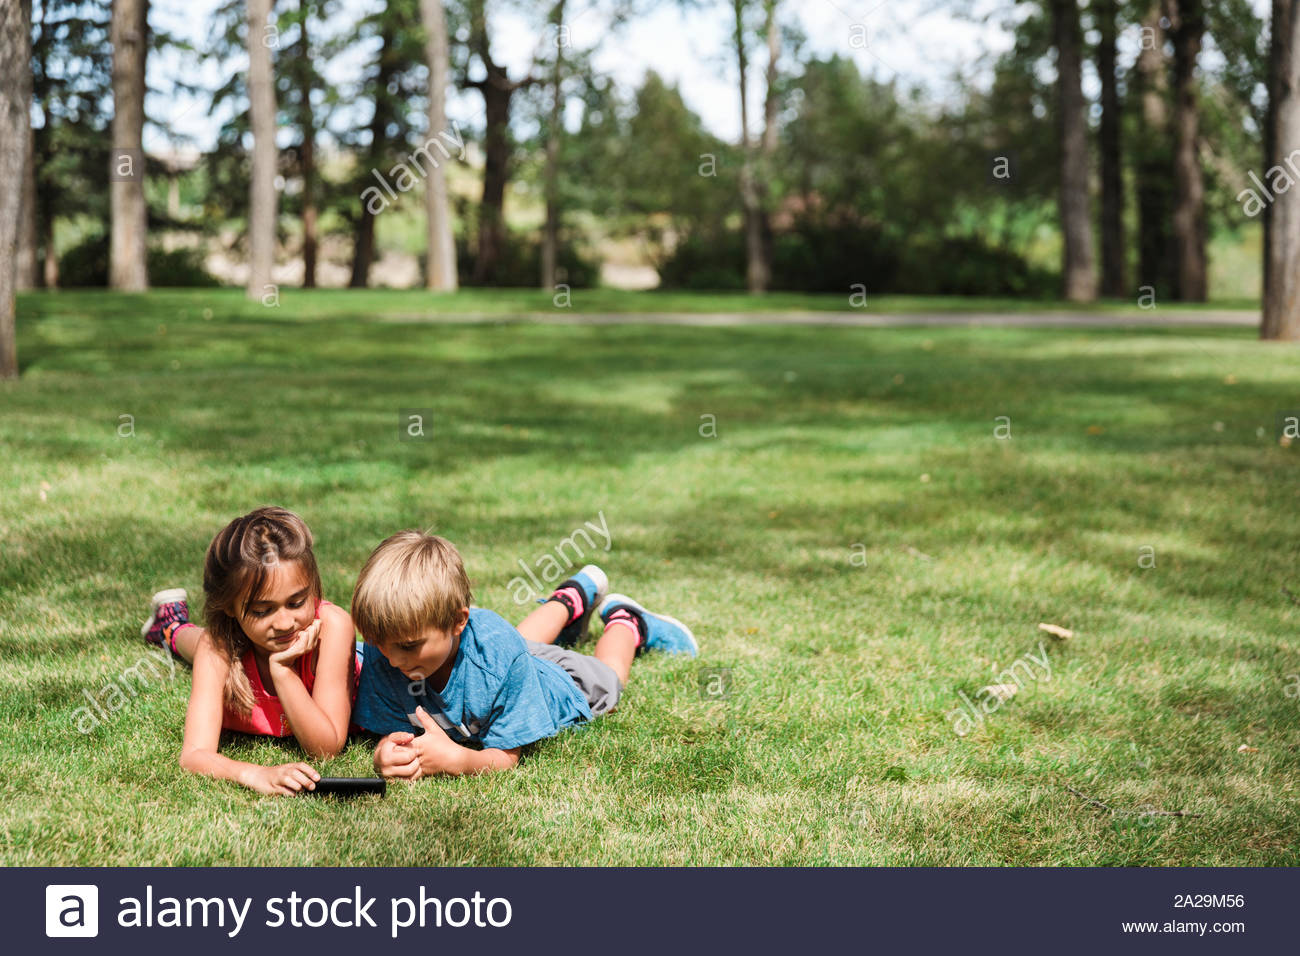 Boy and girl lying on grass using smartphone in park Stock Photo